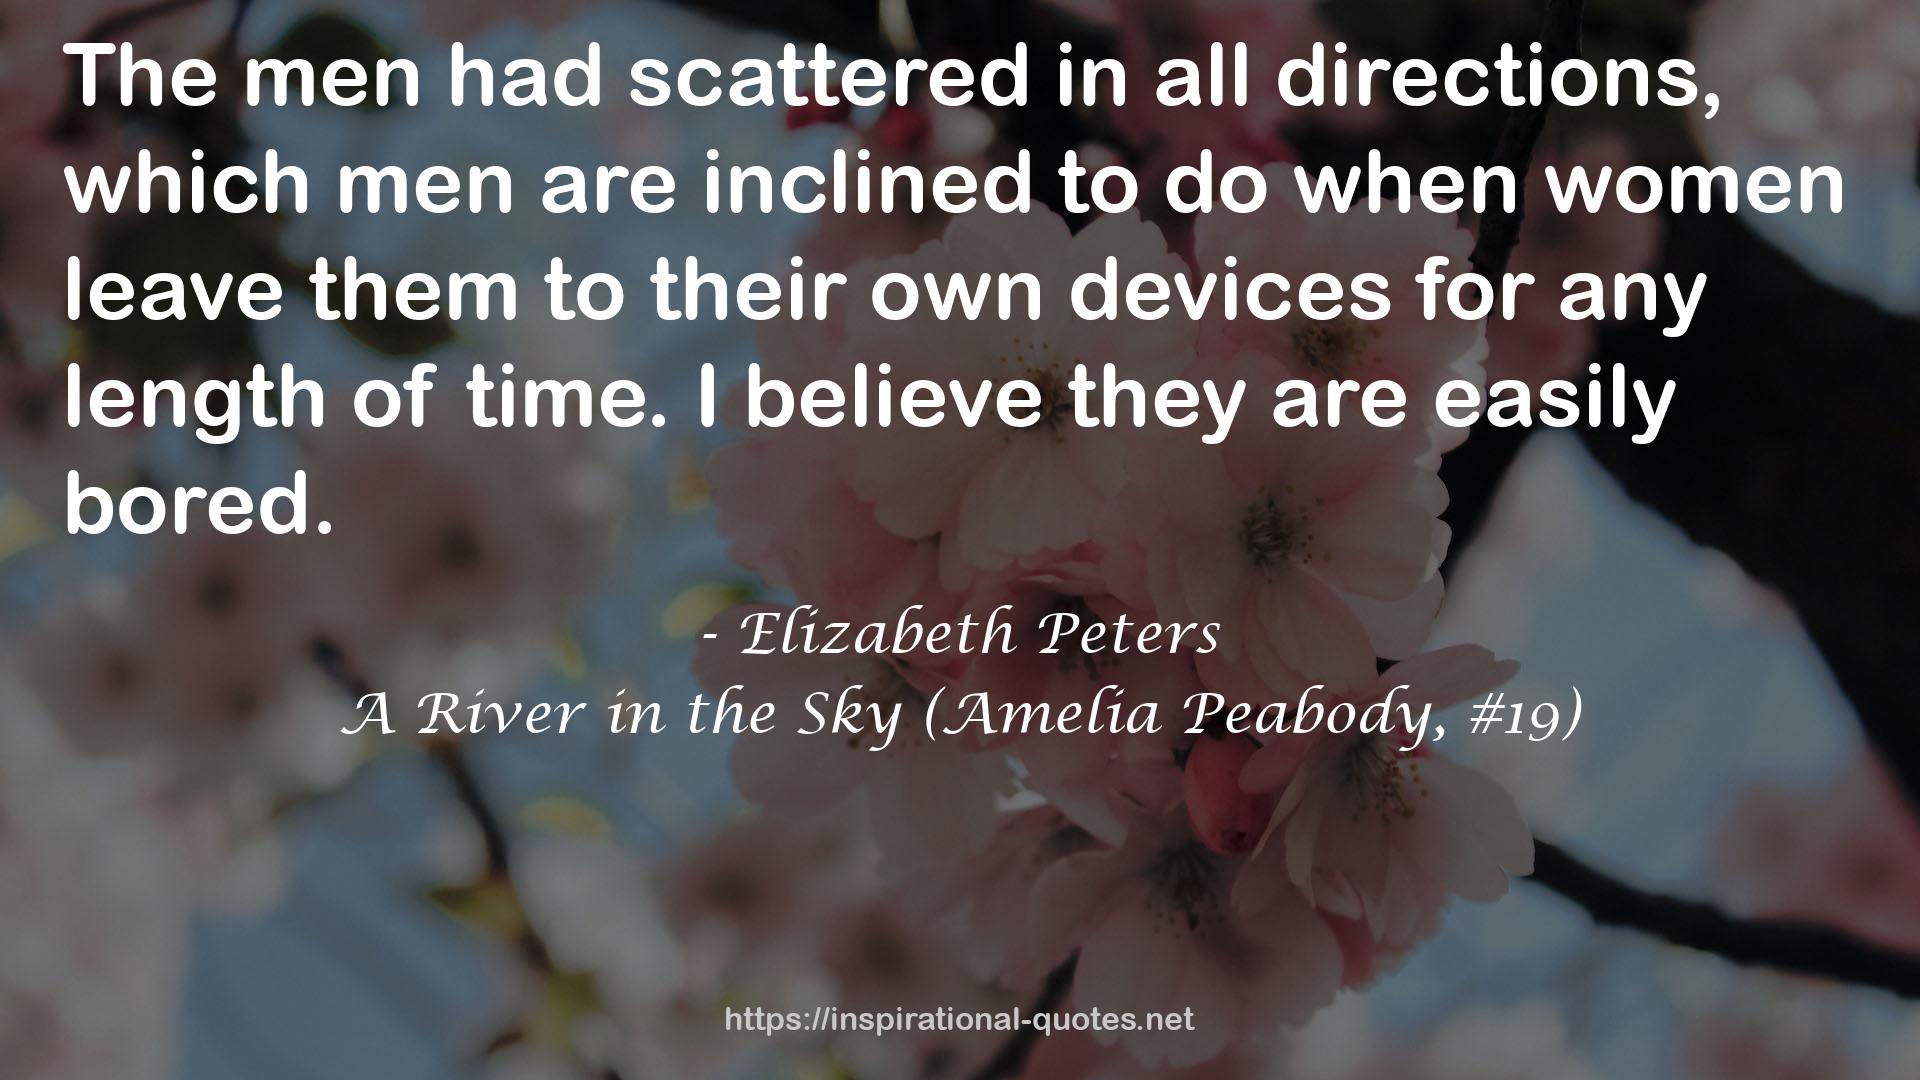 A River in the Sky (Amelia Peabody, #19) QUOTES